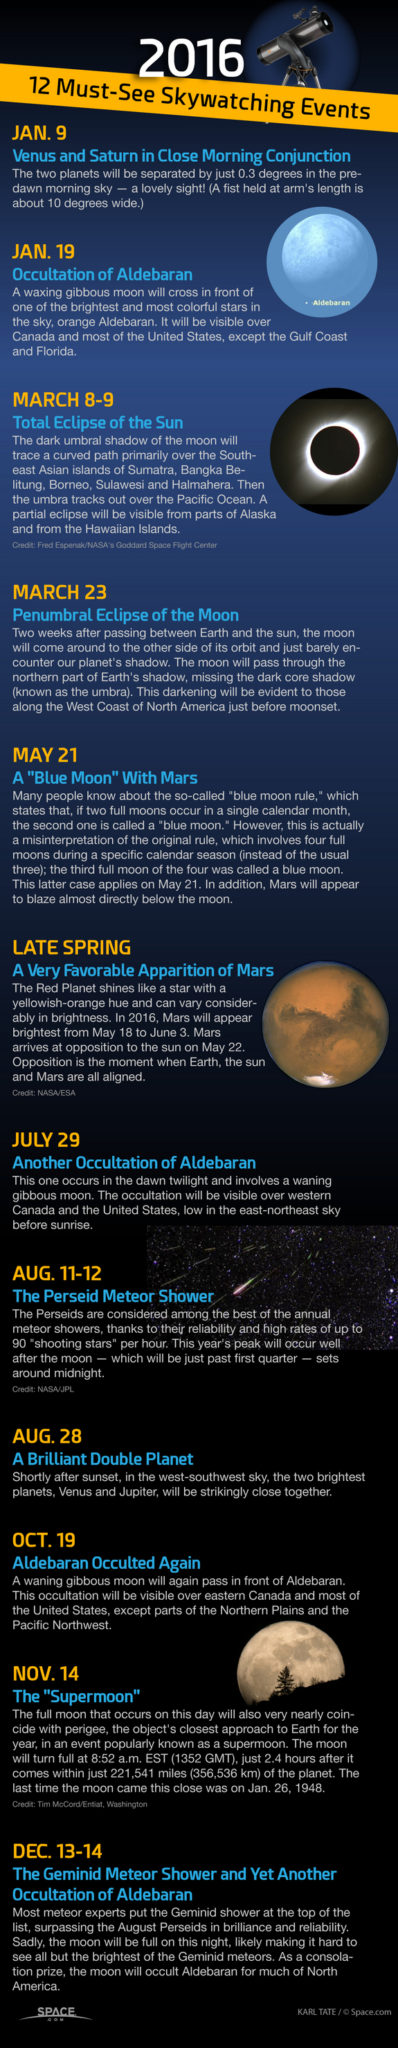 Skywatching events to look for in 2016!